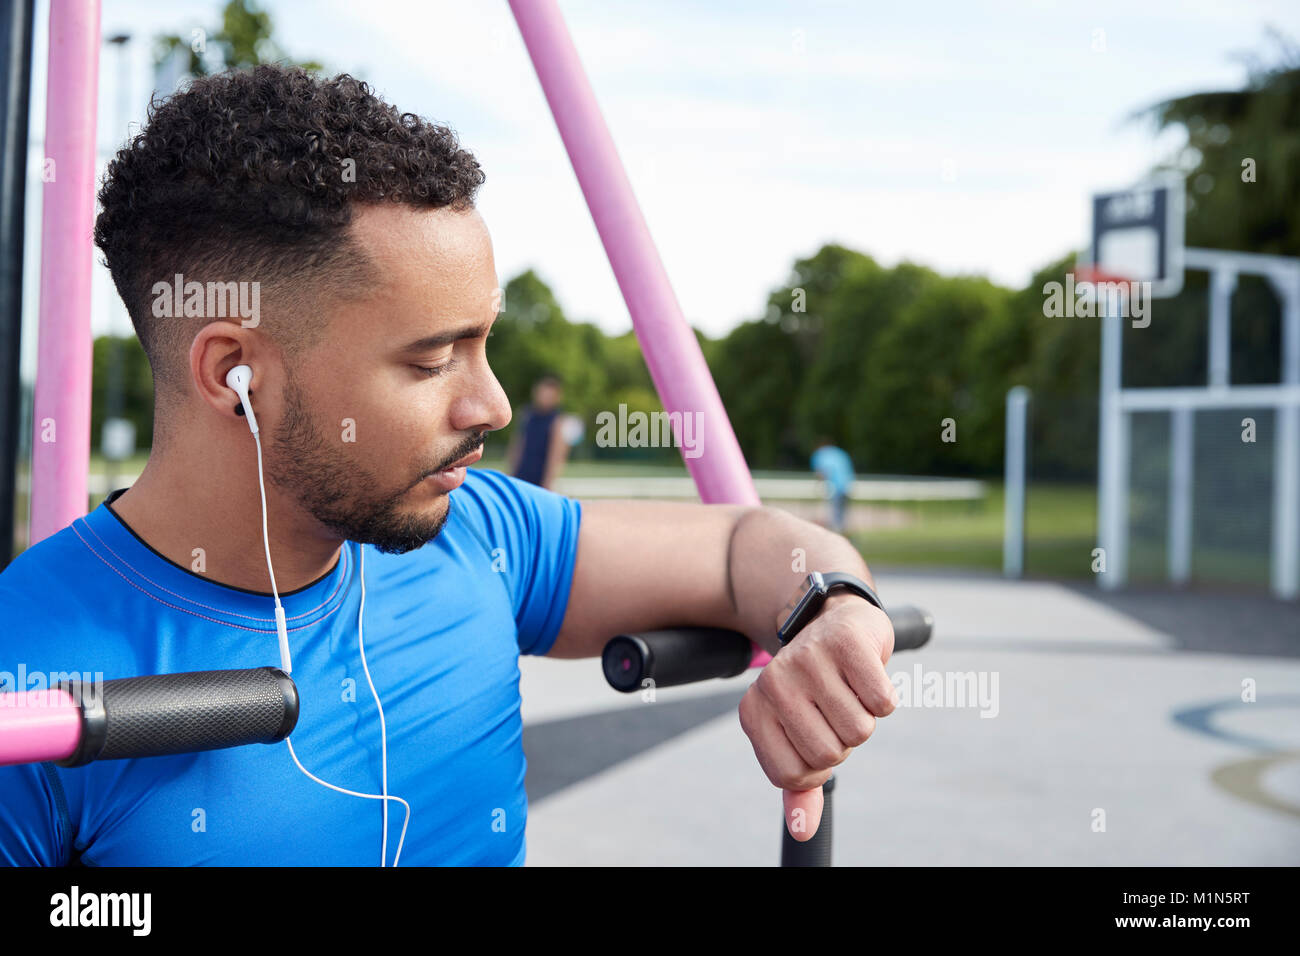 Young man at outdoor gym checking fitness app on smartwatch Stock Photo